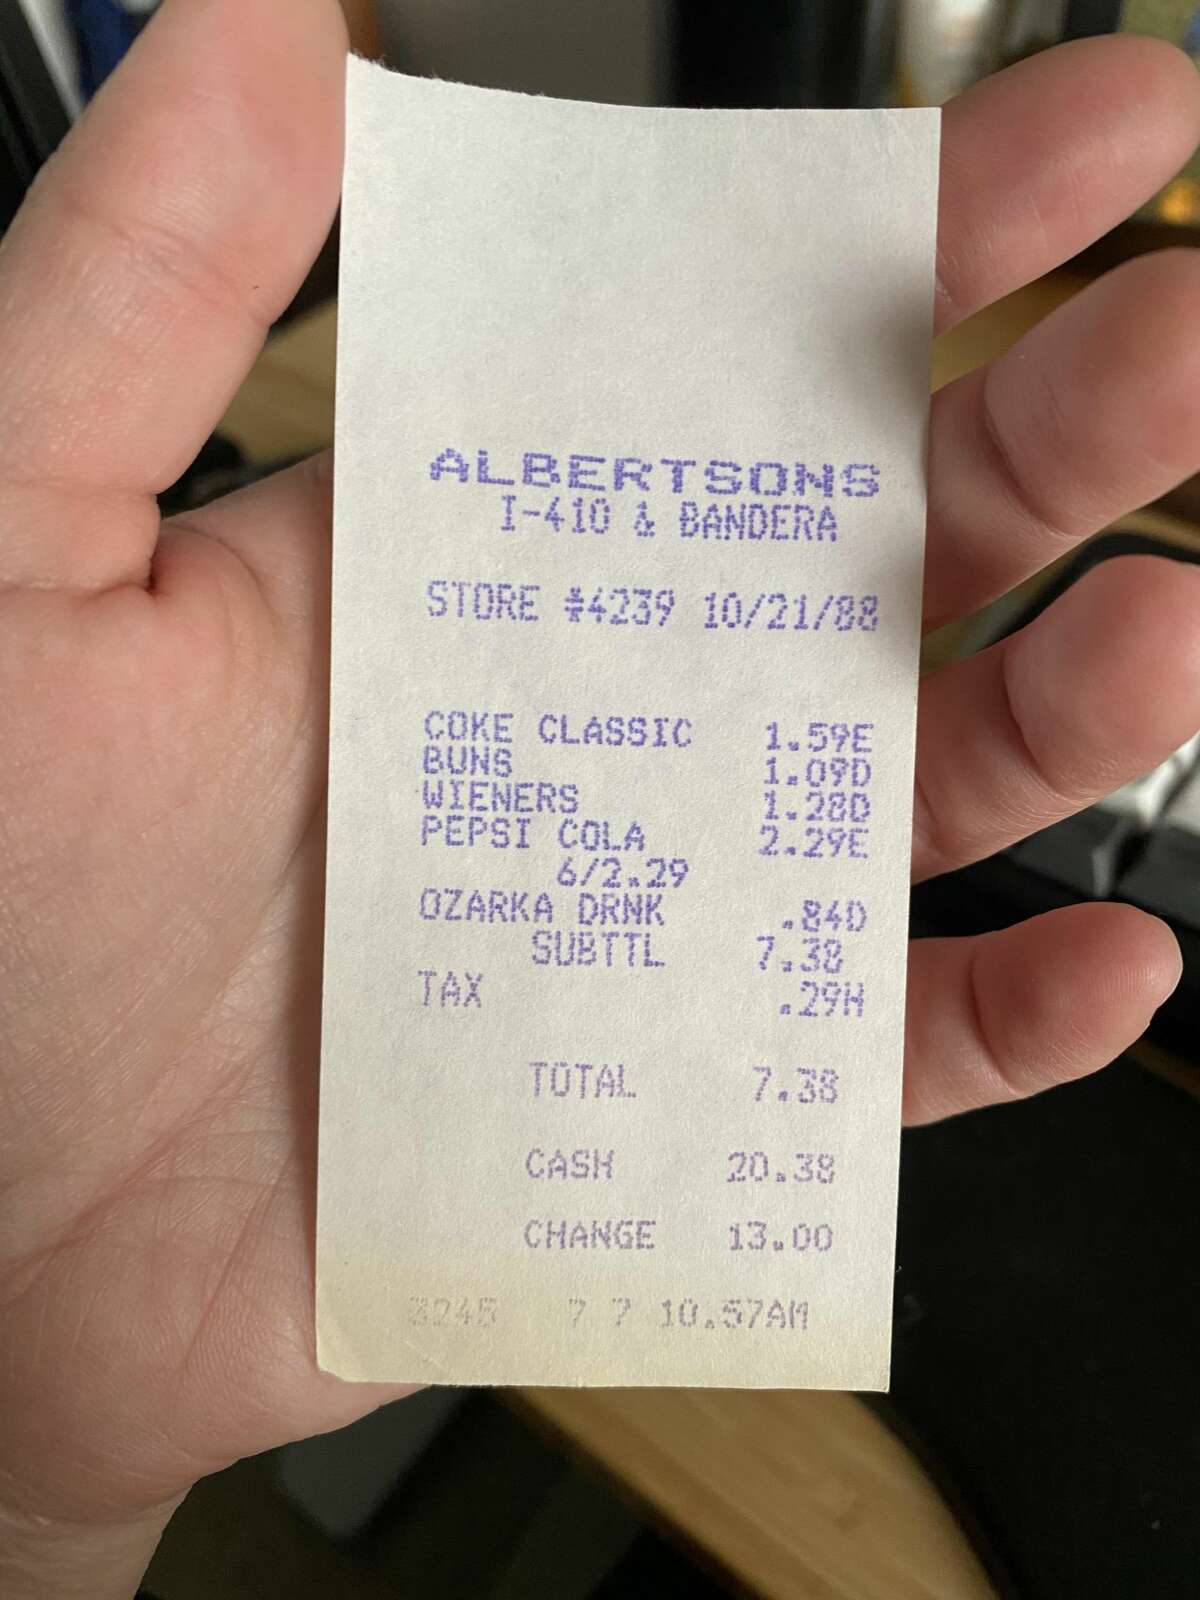 San Antonian Stephanie Garza recently found her local Albertsons store after finding a 33-year-old receipt she found in a book she bought at Half Price Books in College Station.